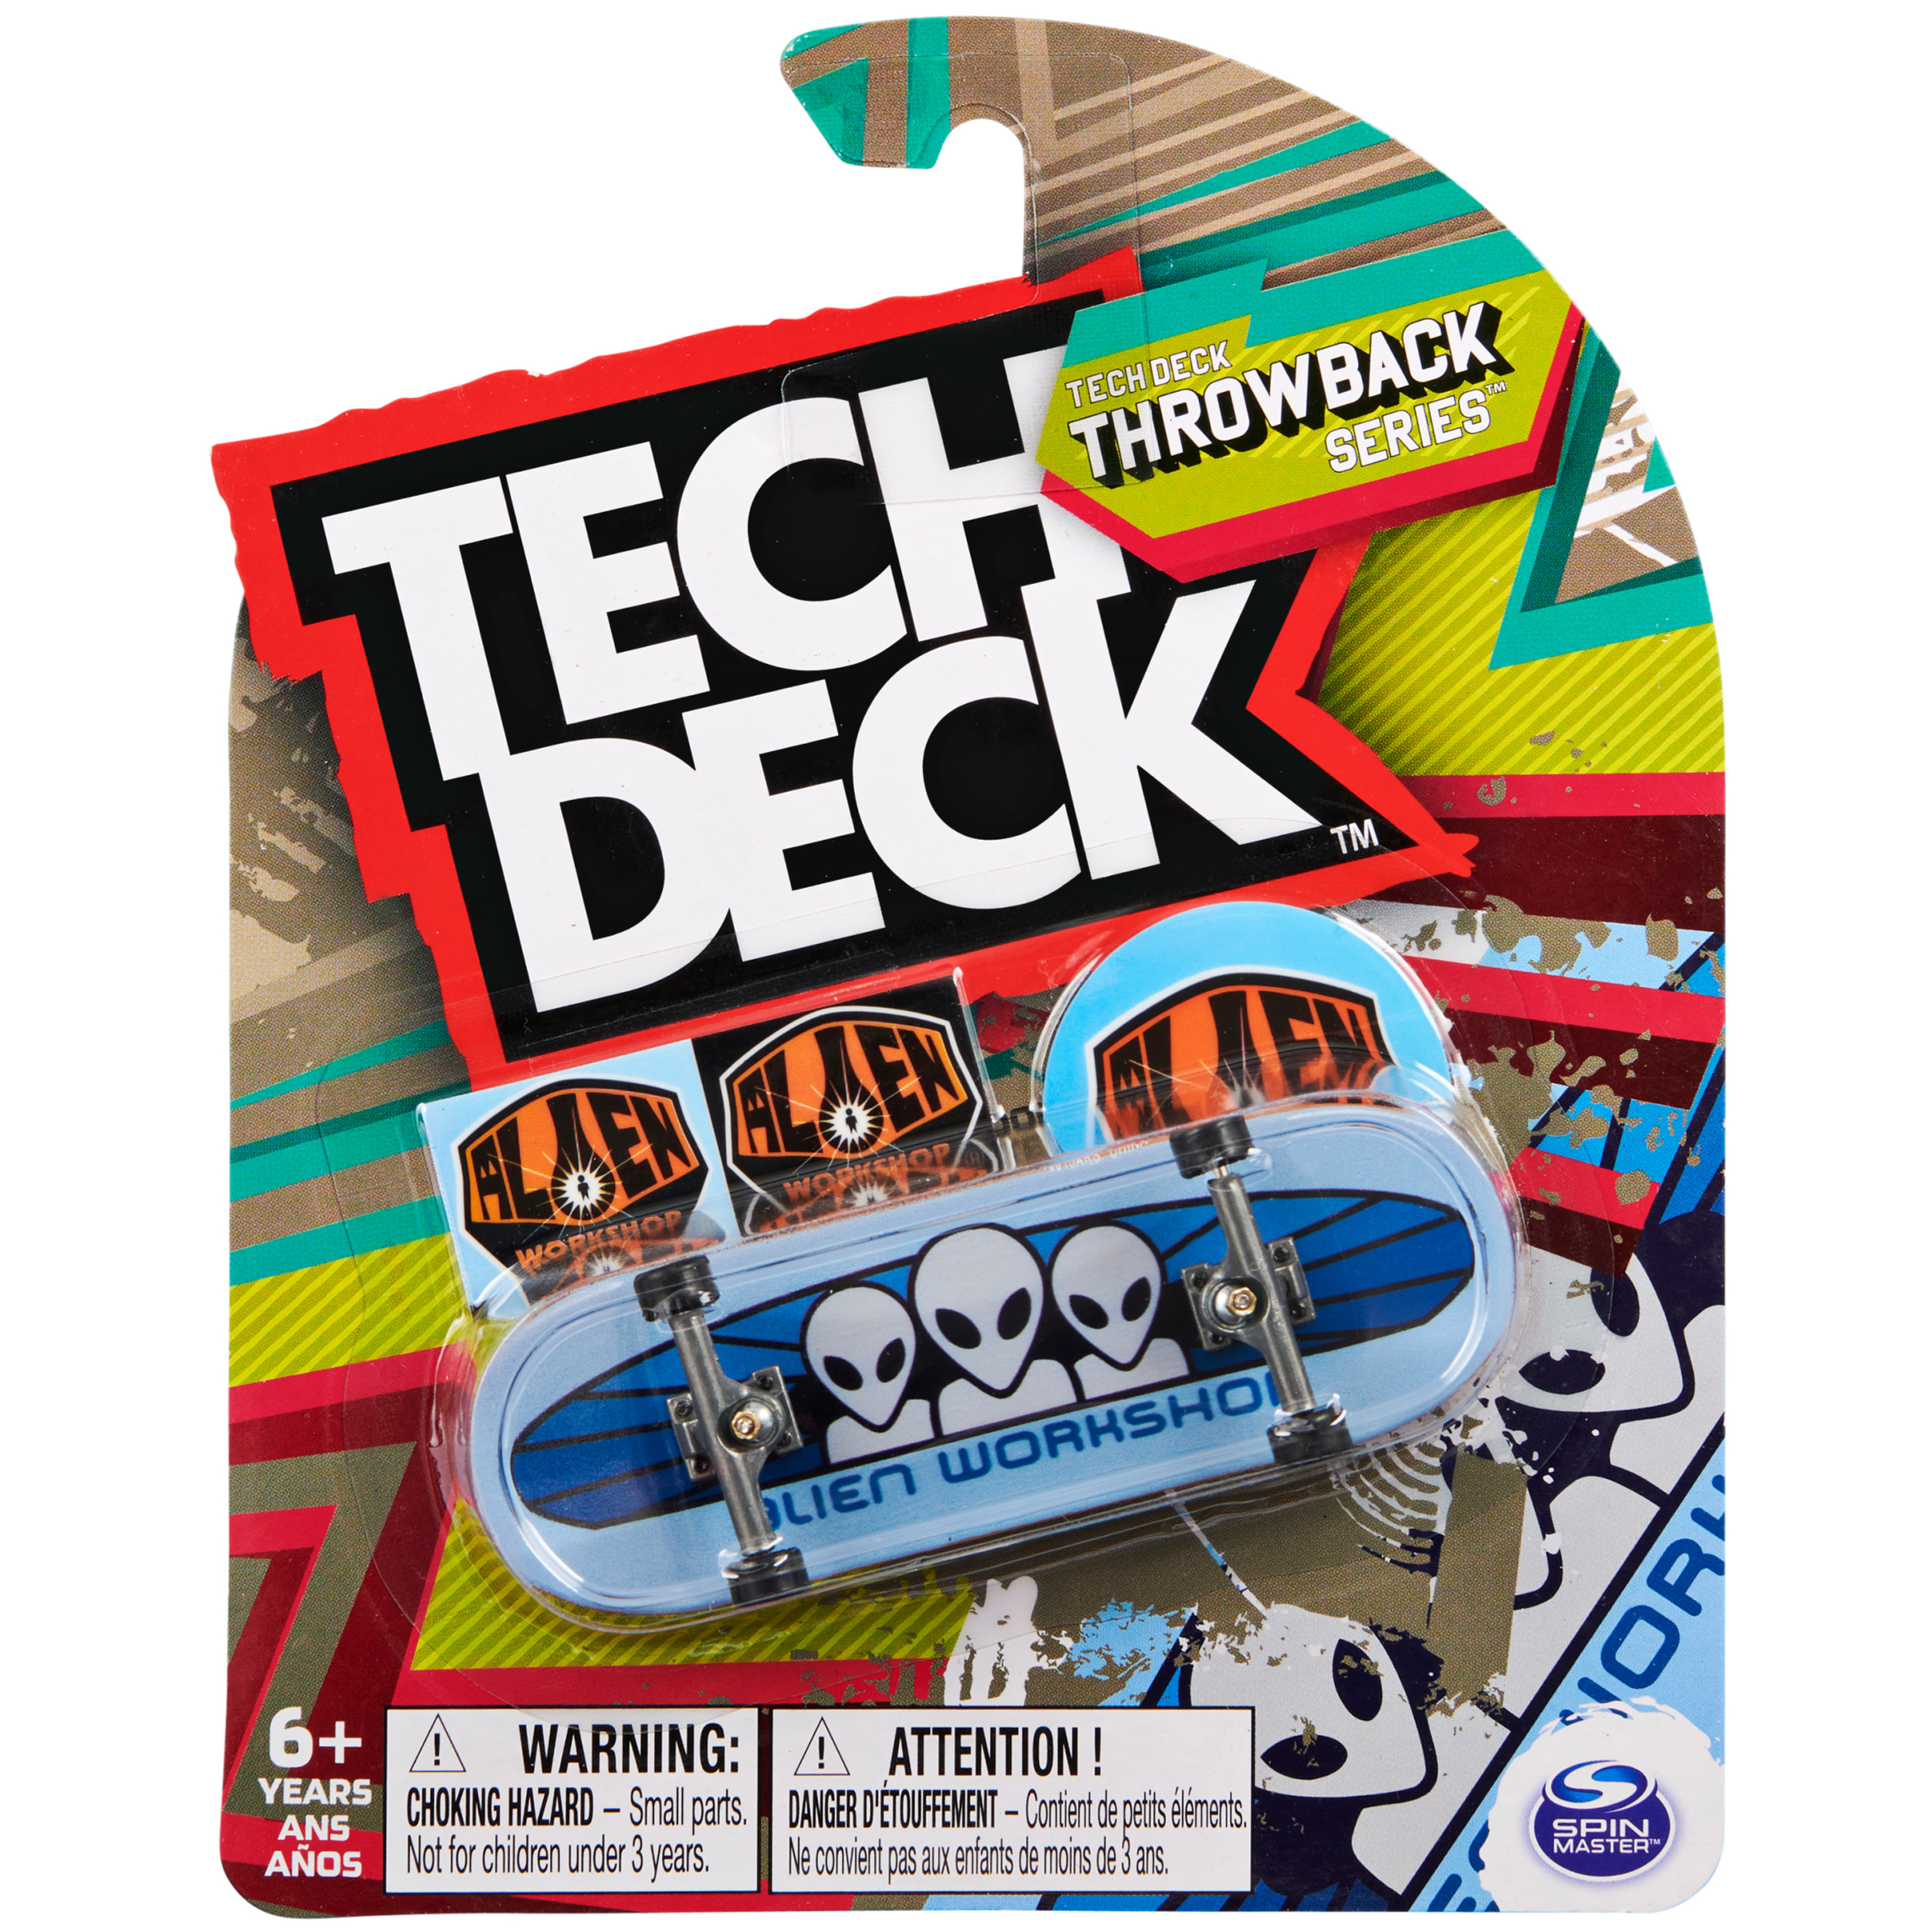 Tech Deck, 96mm Throwback Series Finger Skateboard (Styles May Vary) - image 1 of 7